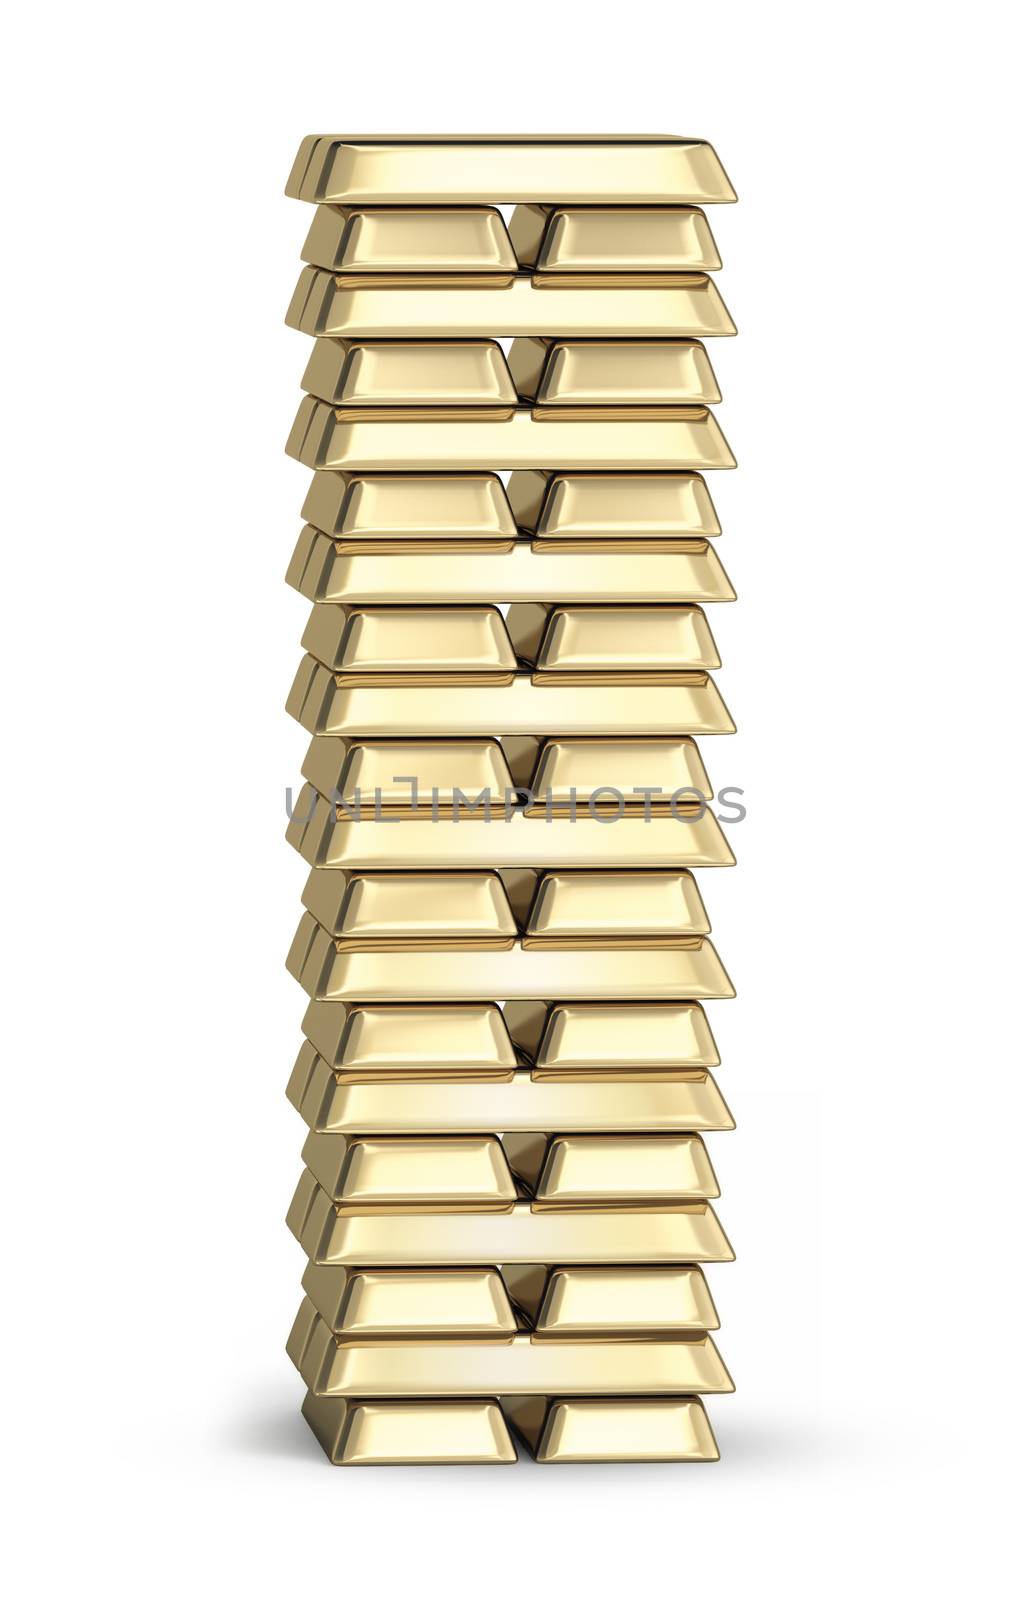 Letter I from stacked gold bars on white background